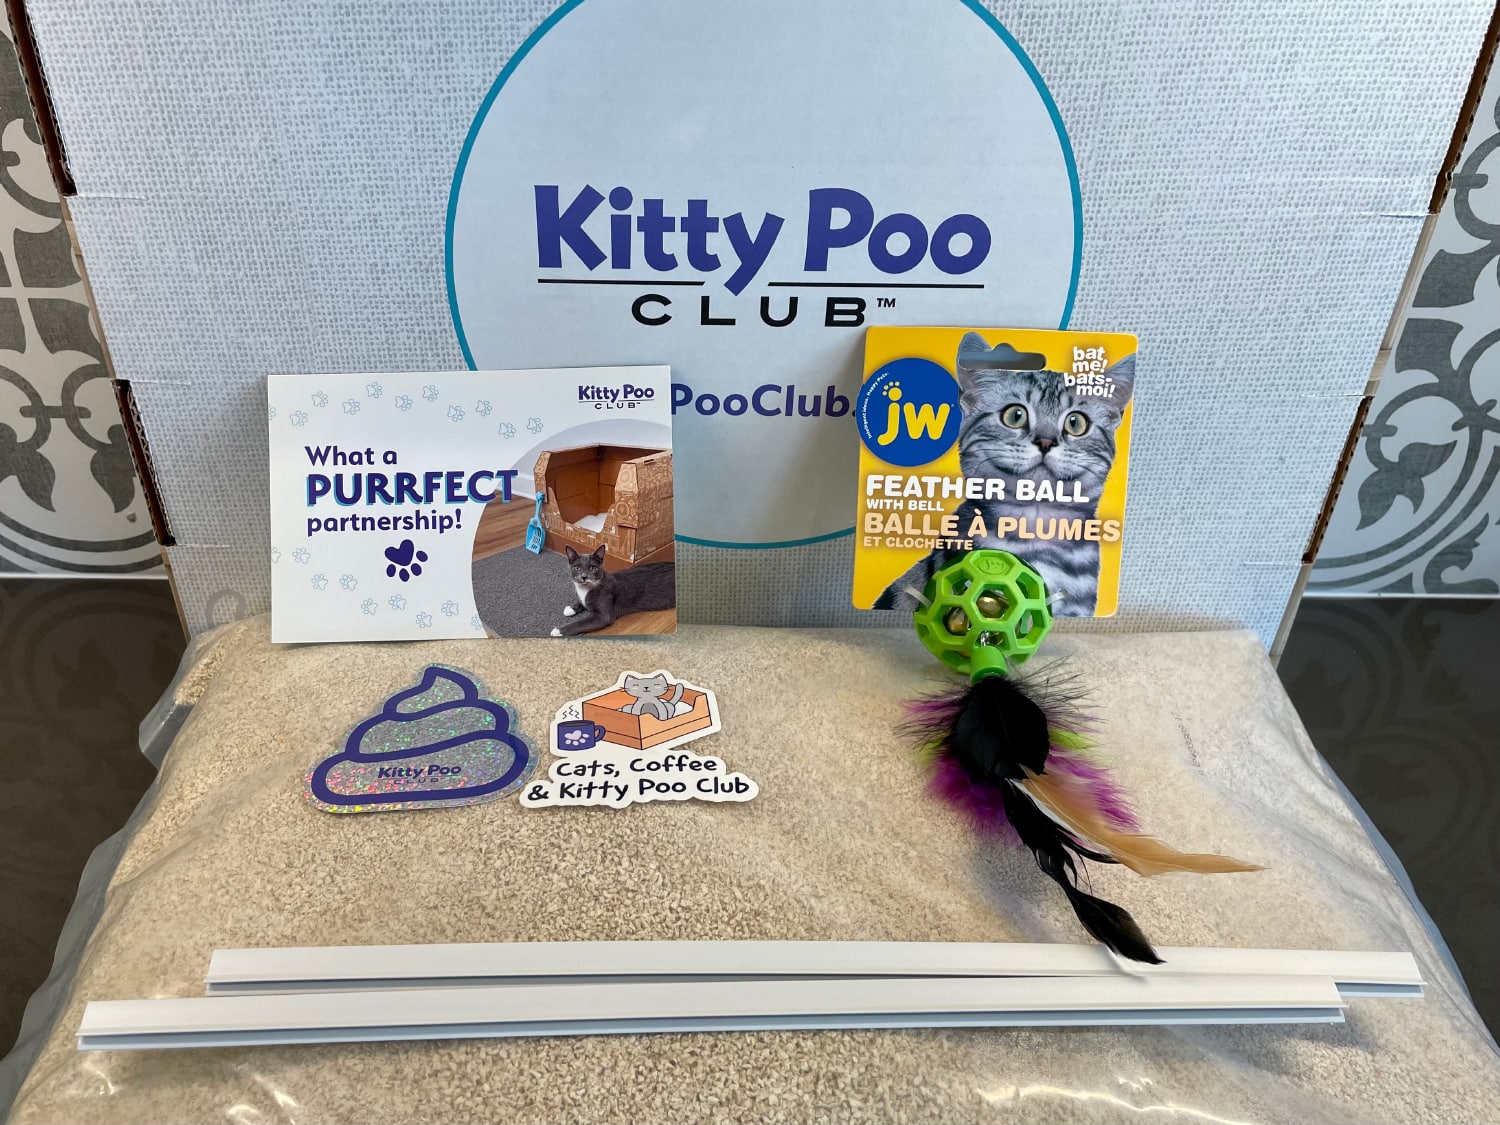 Kitty Poo Club products